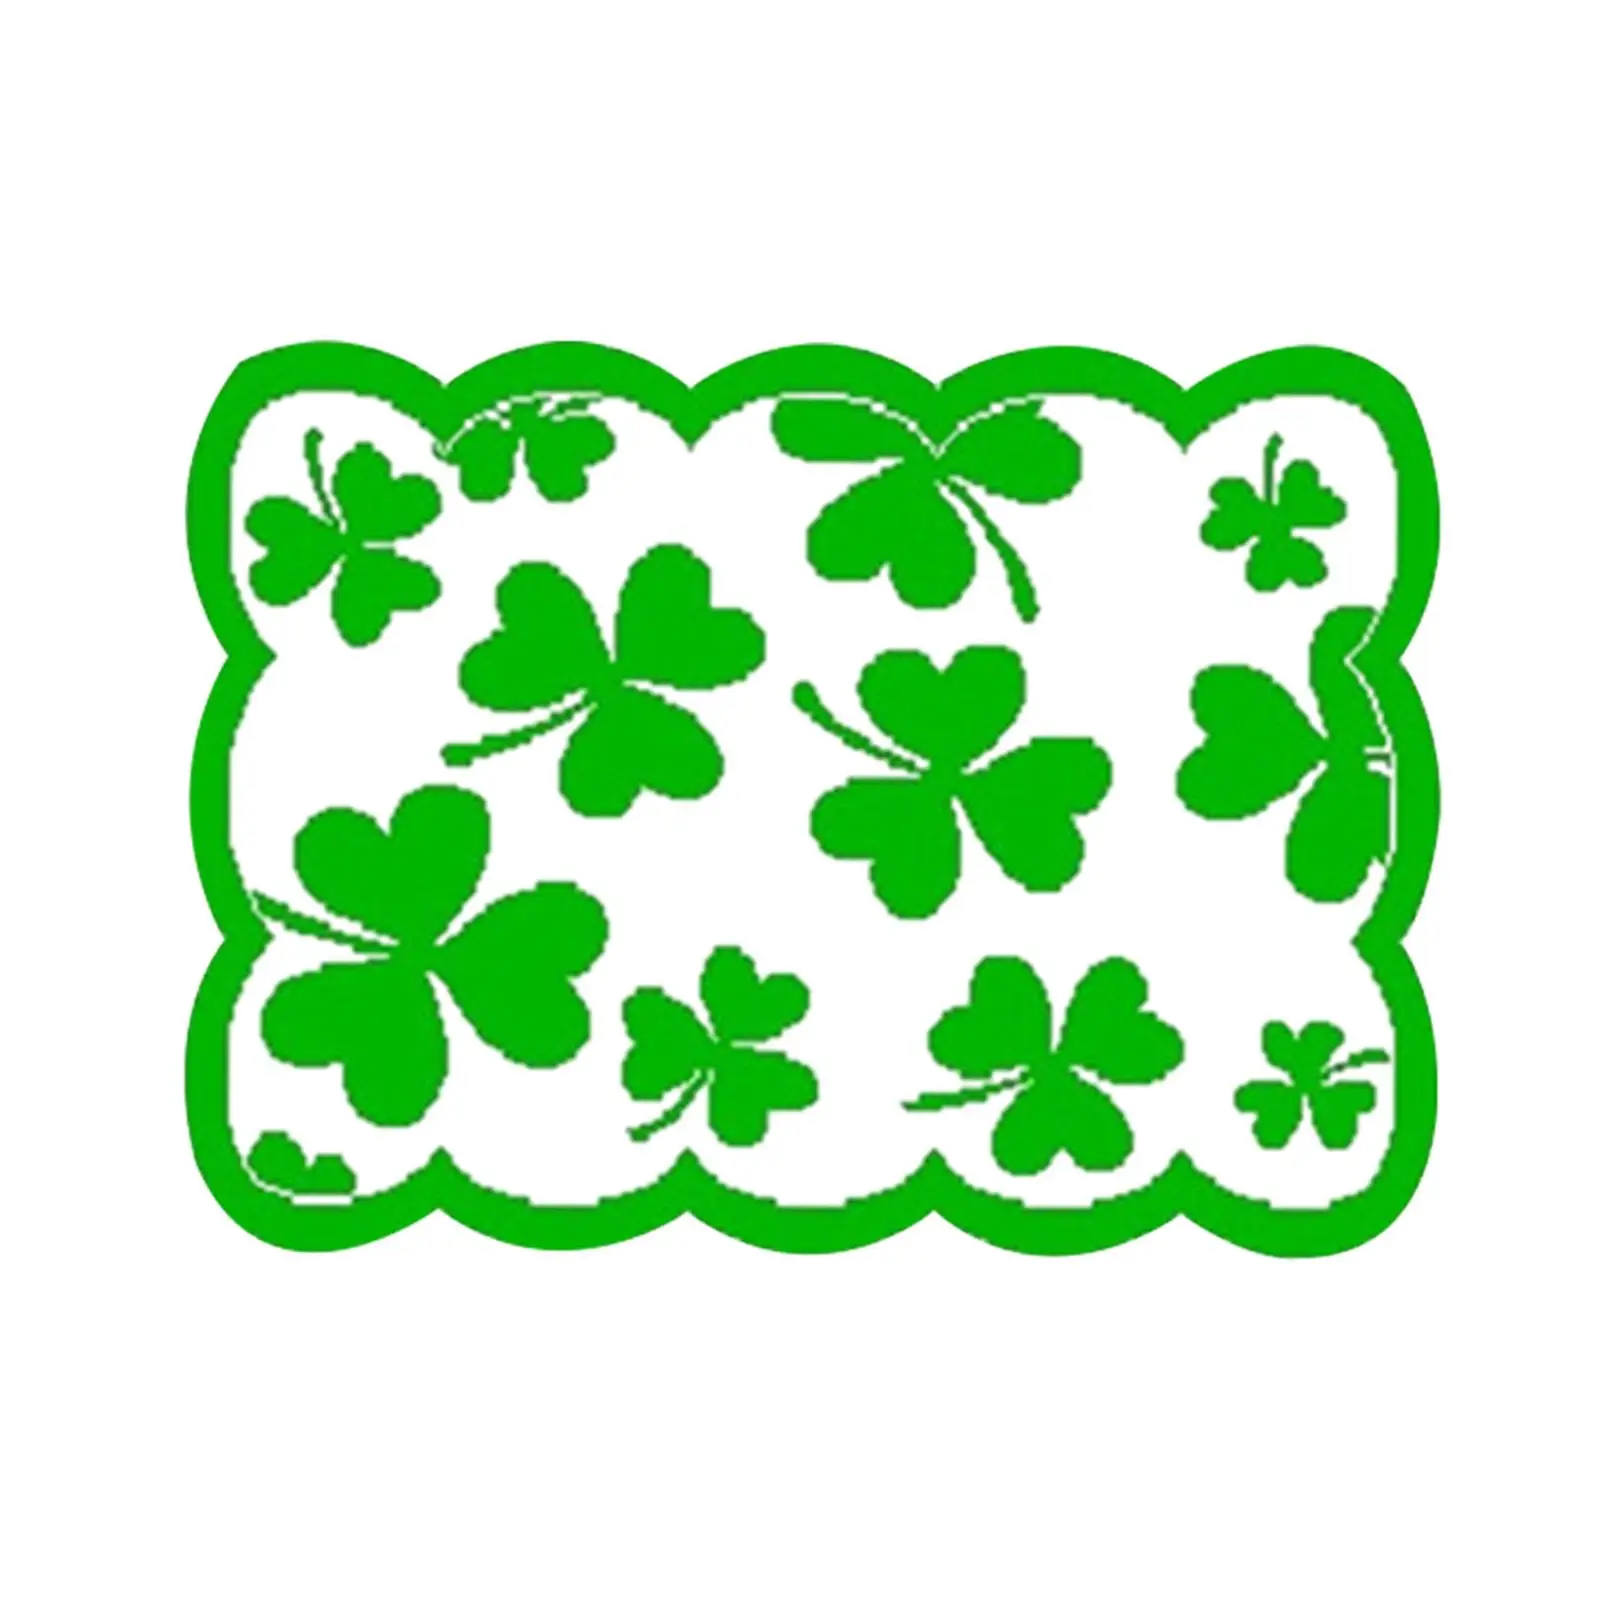 

Placemat 45x30cm Durable Ornament Lace ST Patricks Day Decor Festival Place Mat for Bar Indoor Dining Table Home Holiday Dinner